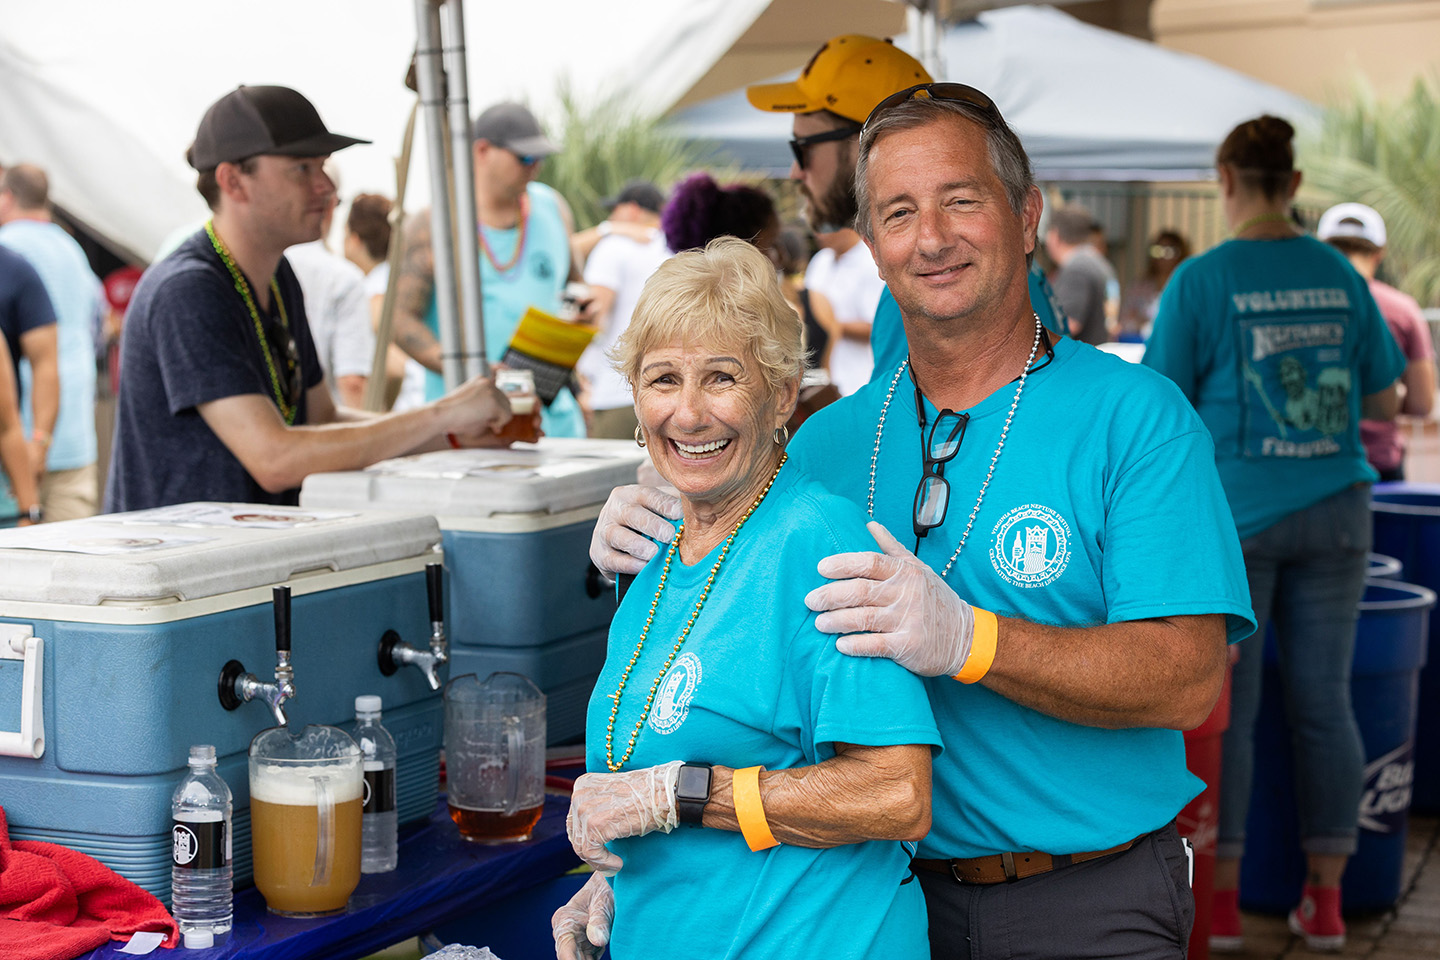 Two volunteers posing for photo at Craft Beer Festival